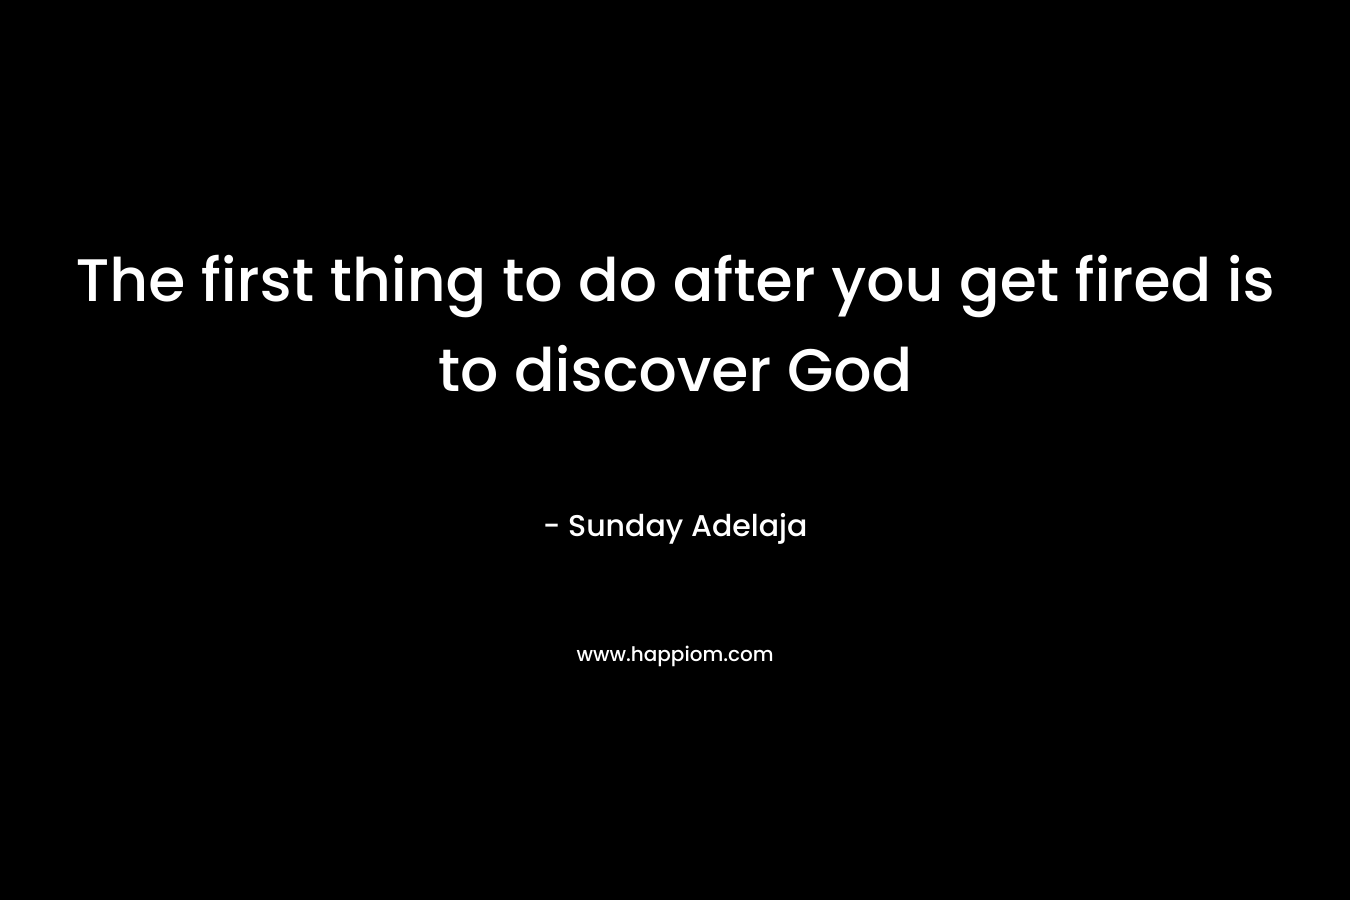 The first thing to do after you get fired is to discover God